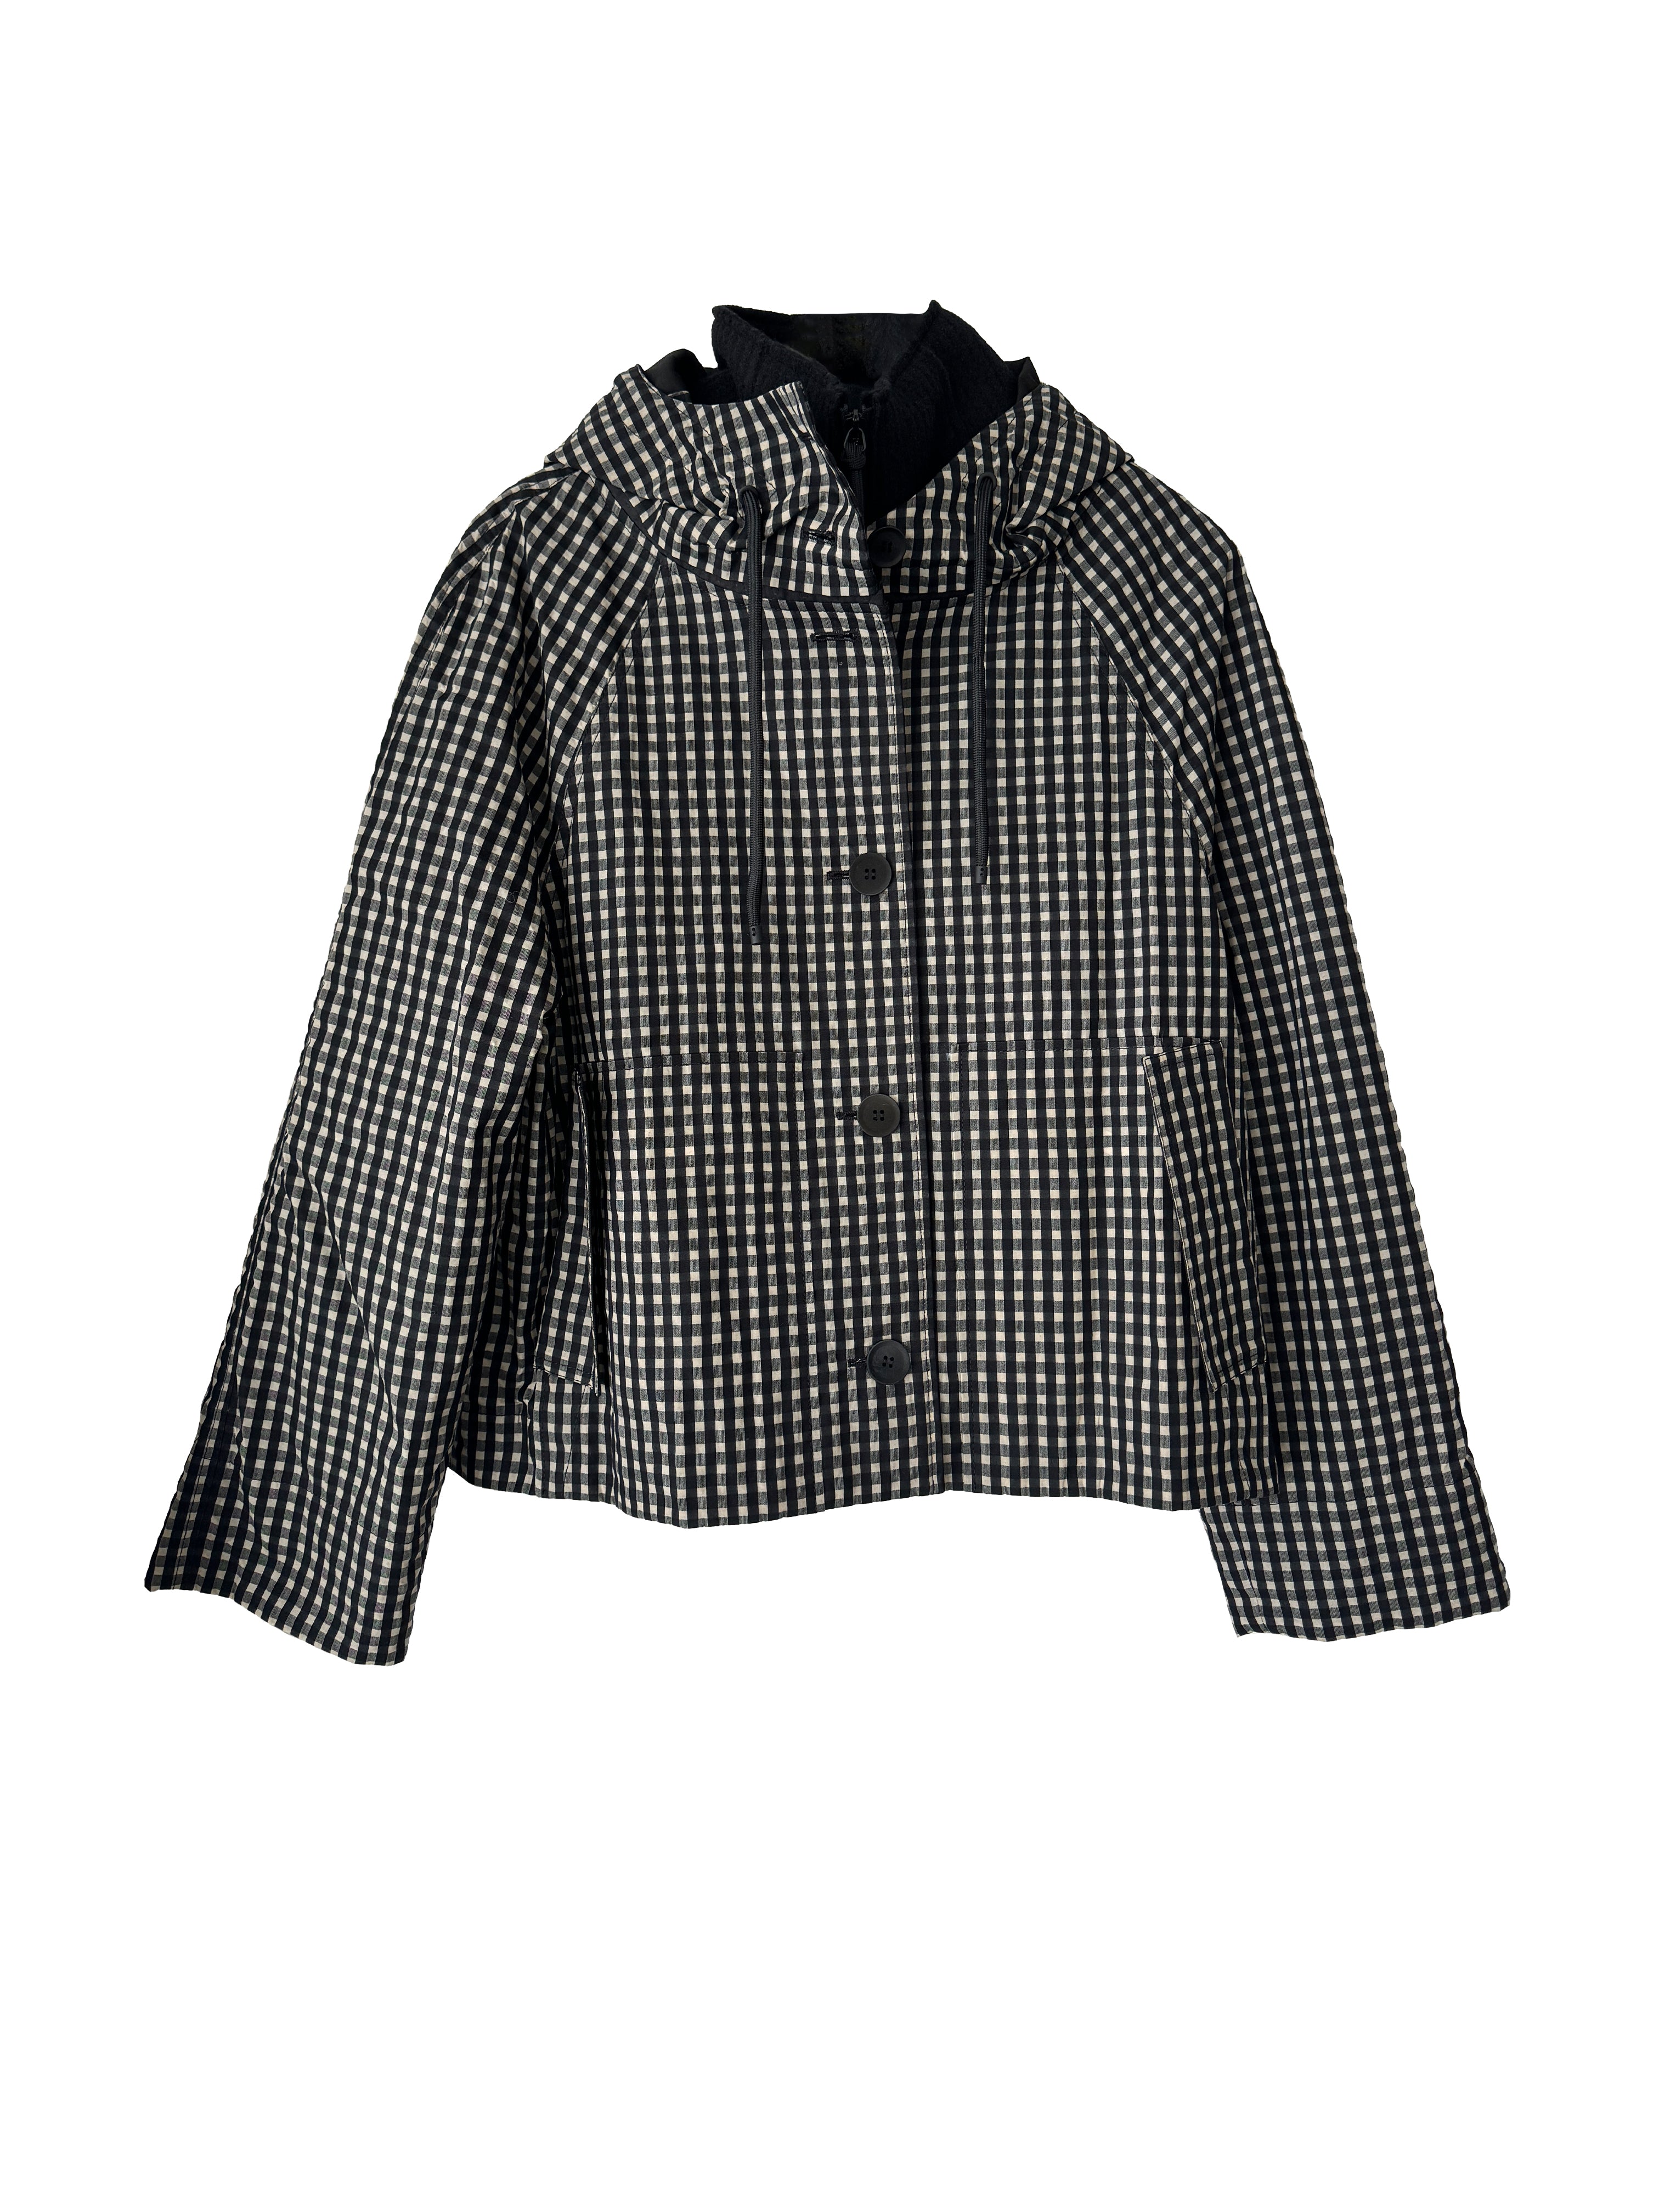 BARIA TWO IN ONE JACKET CHECK